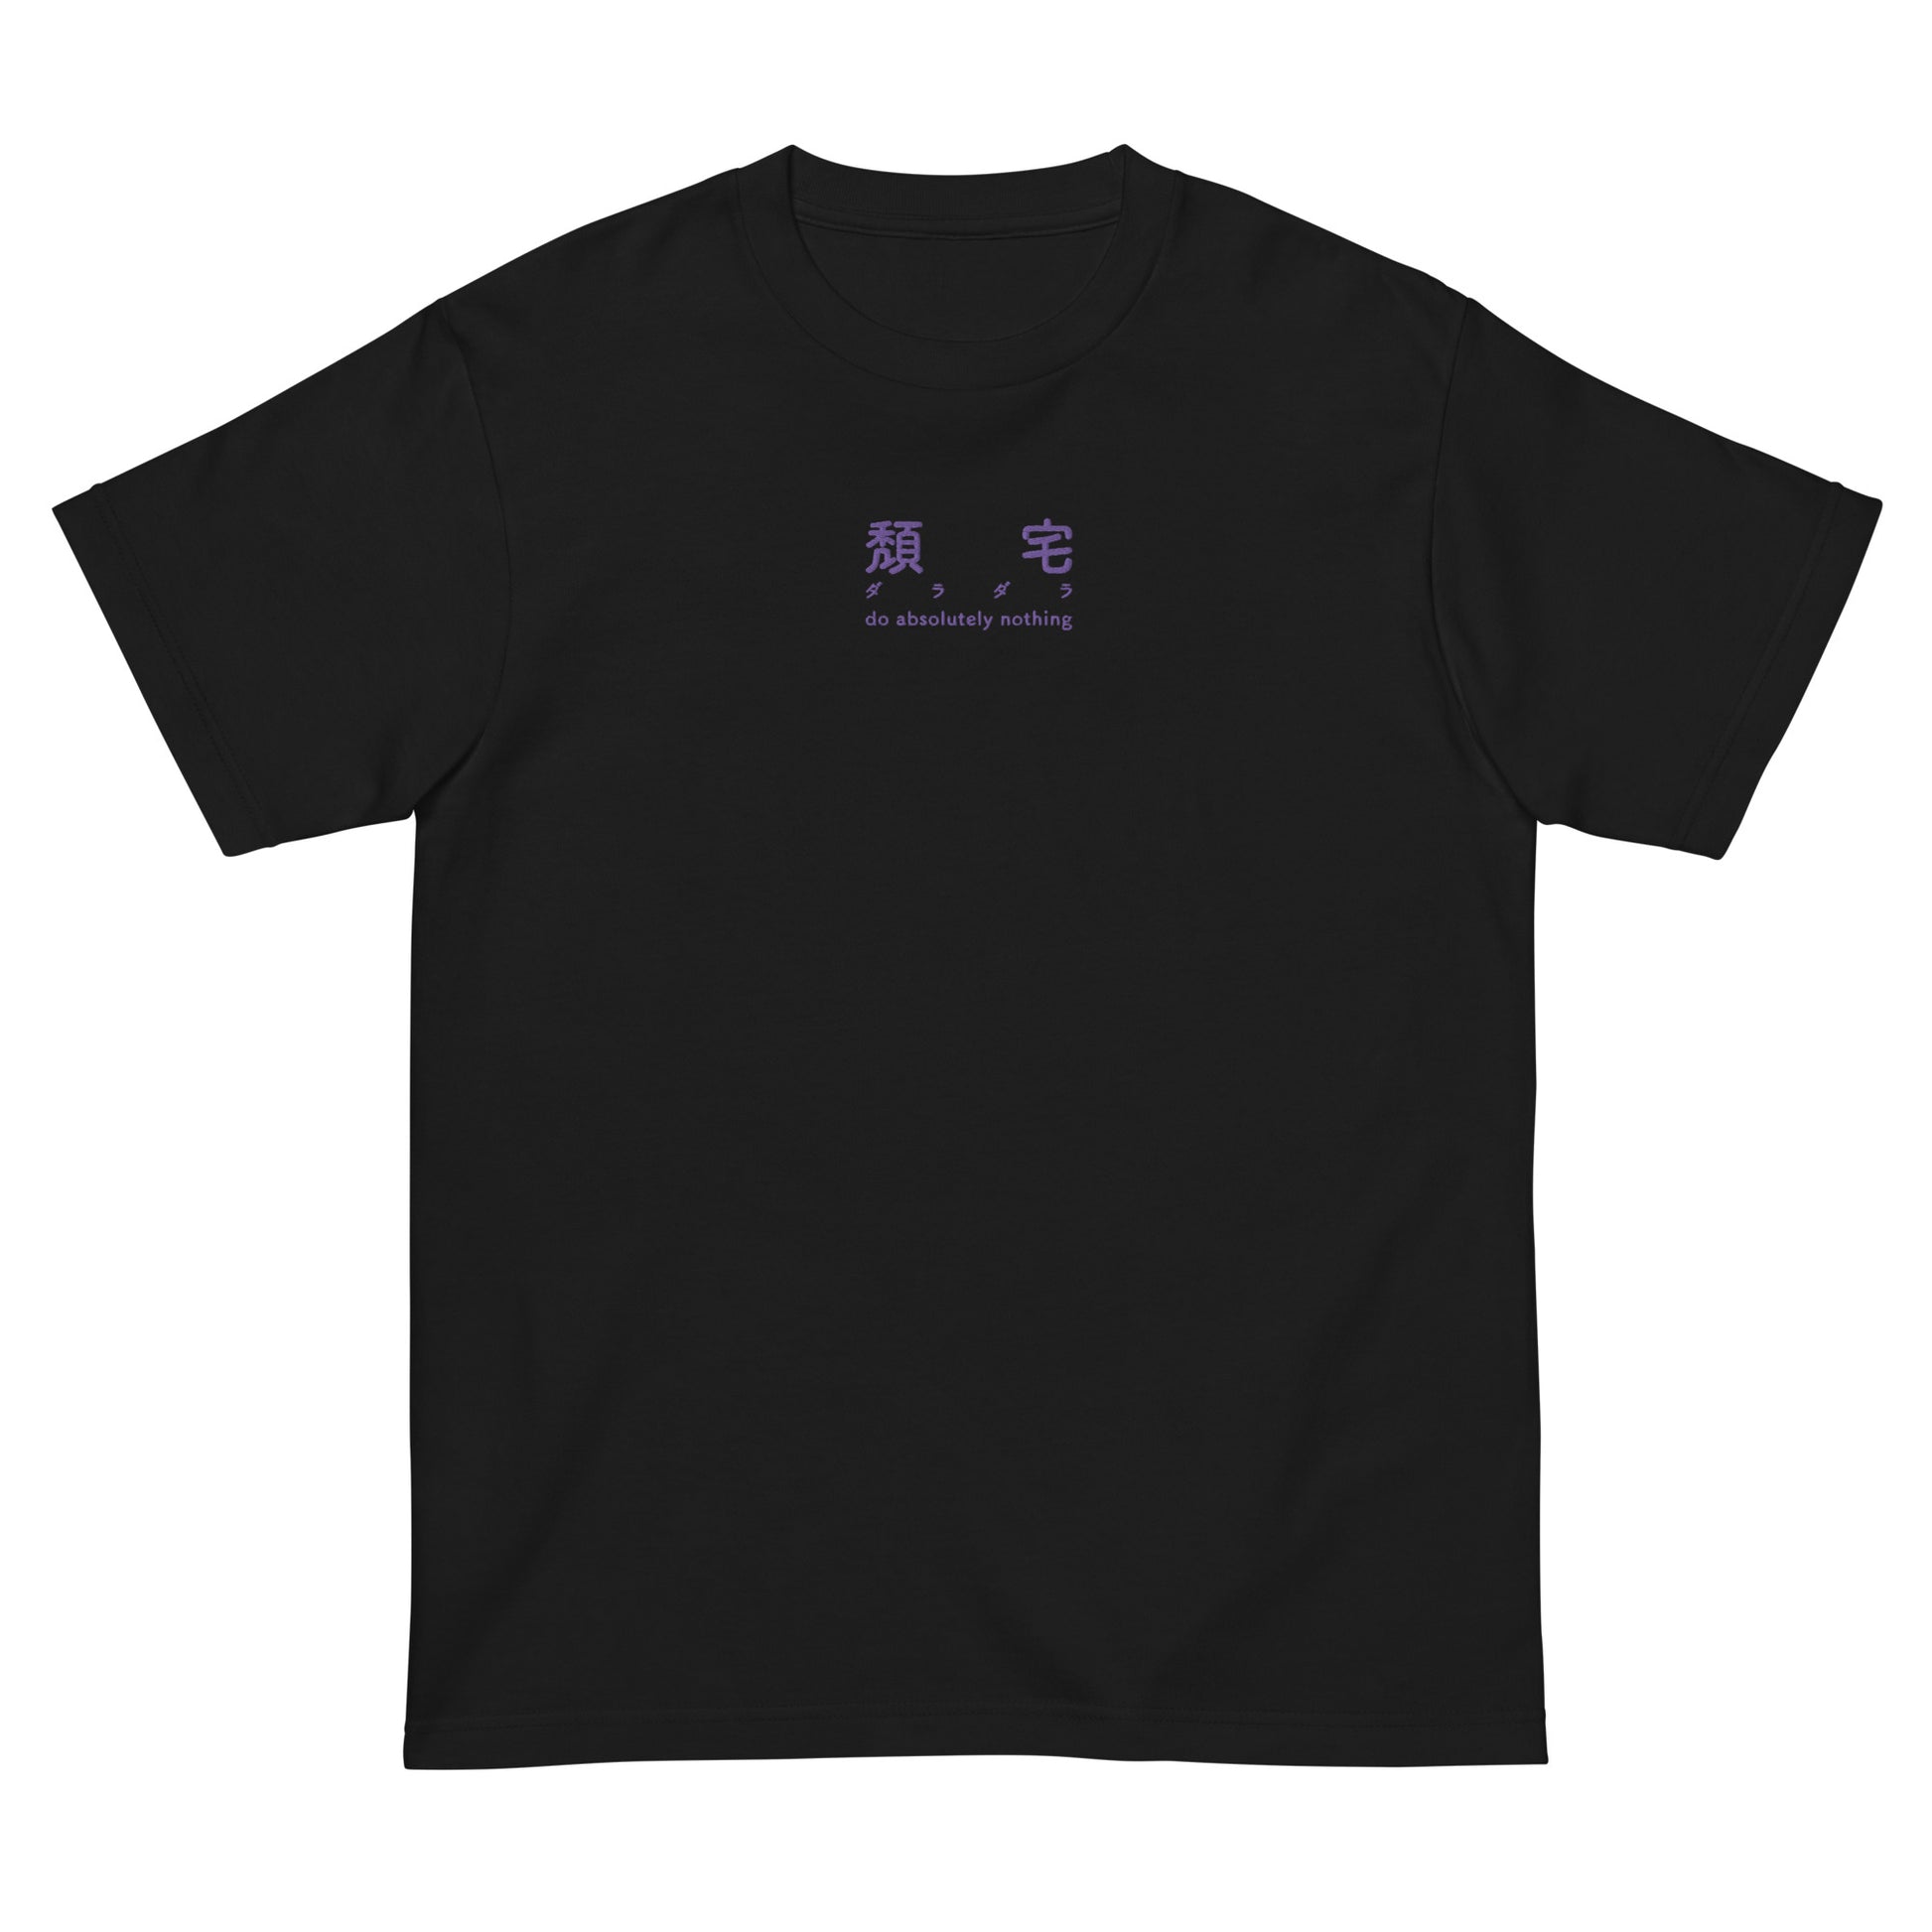 Black High Quality Tee - Front Design with an Purple Embroidery "do absolutely nothing" in three languages